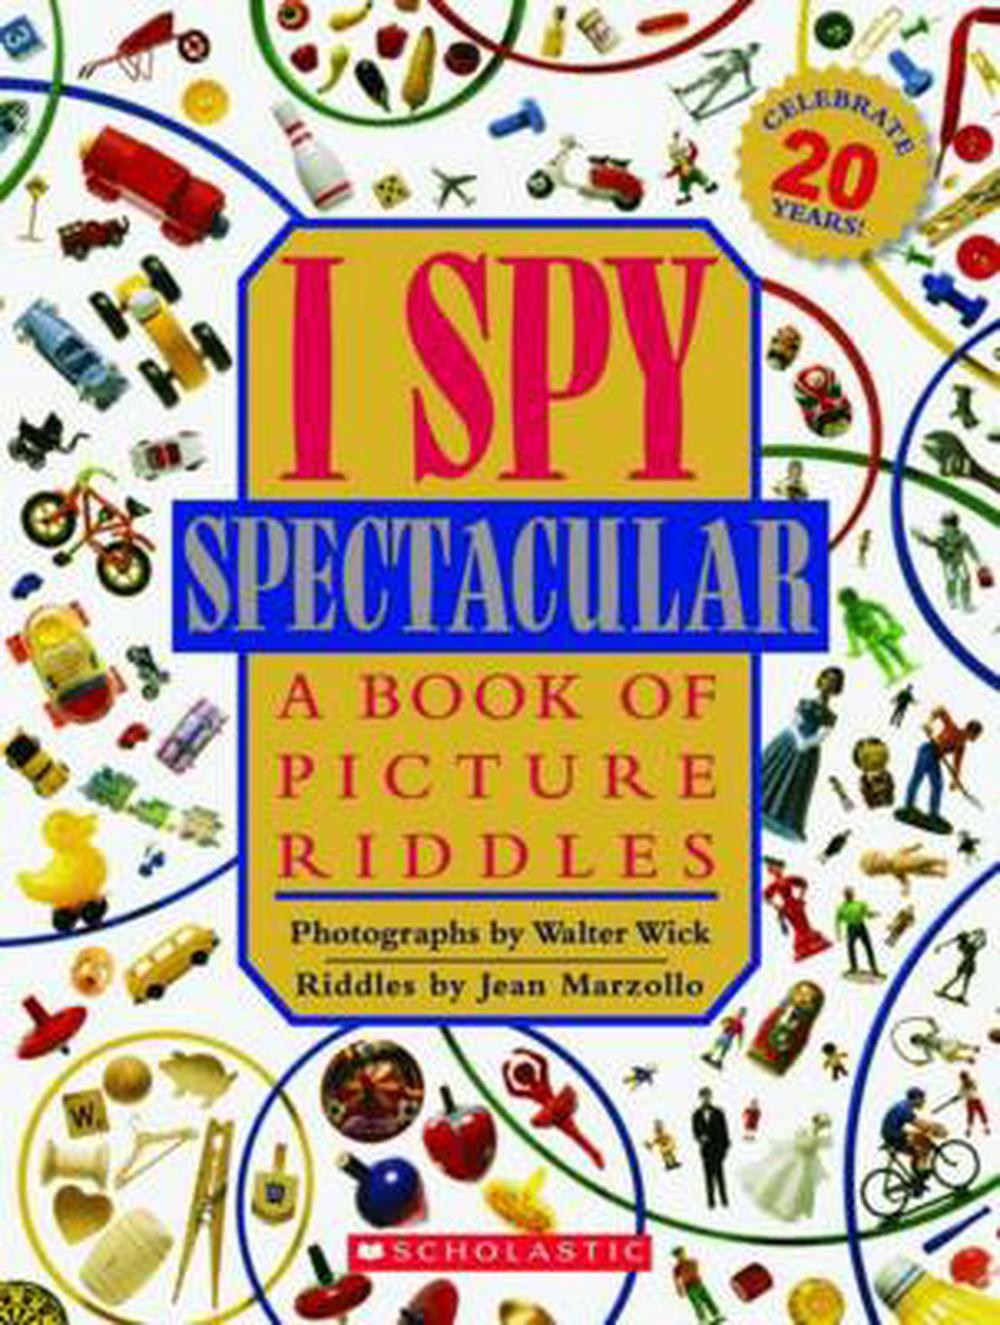 I Spy Spectacular A Book Of Picture Riddles By Jean Marzollo